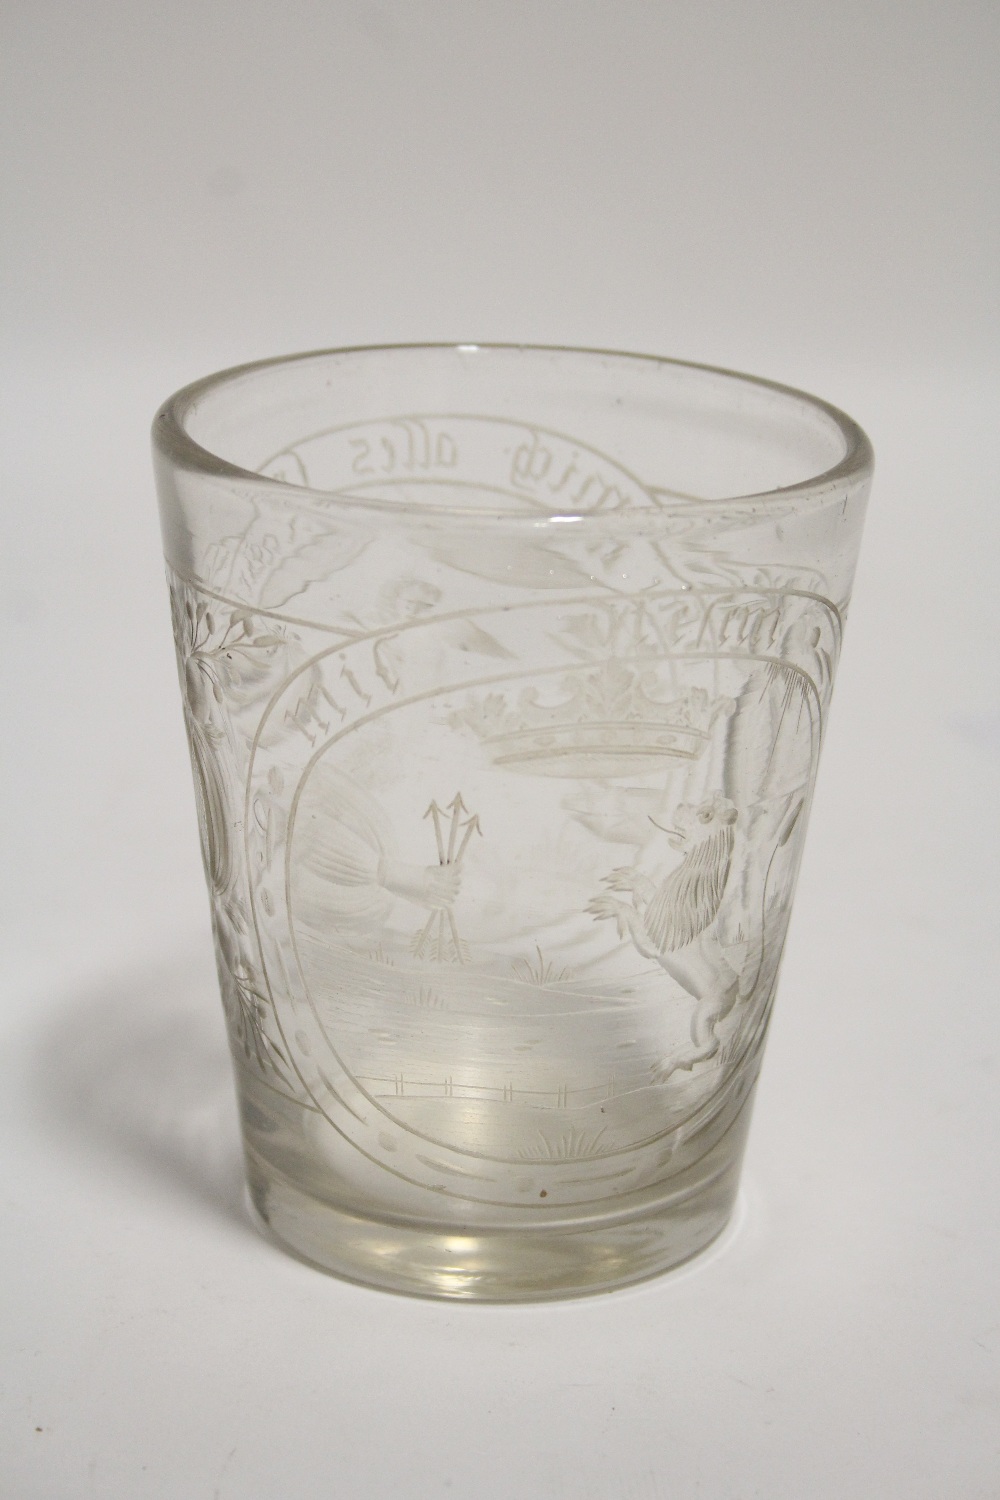 AN 18th Century GERMAN GLASS FUNNEL-SHAPED BEAKER with intaglio engraved heraldic device to one side - Image 2 of 10